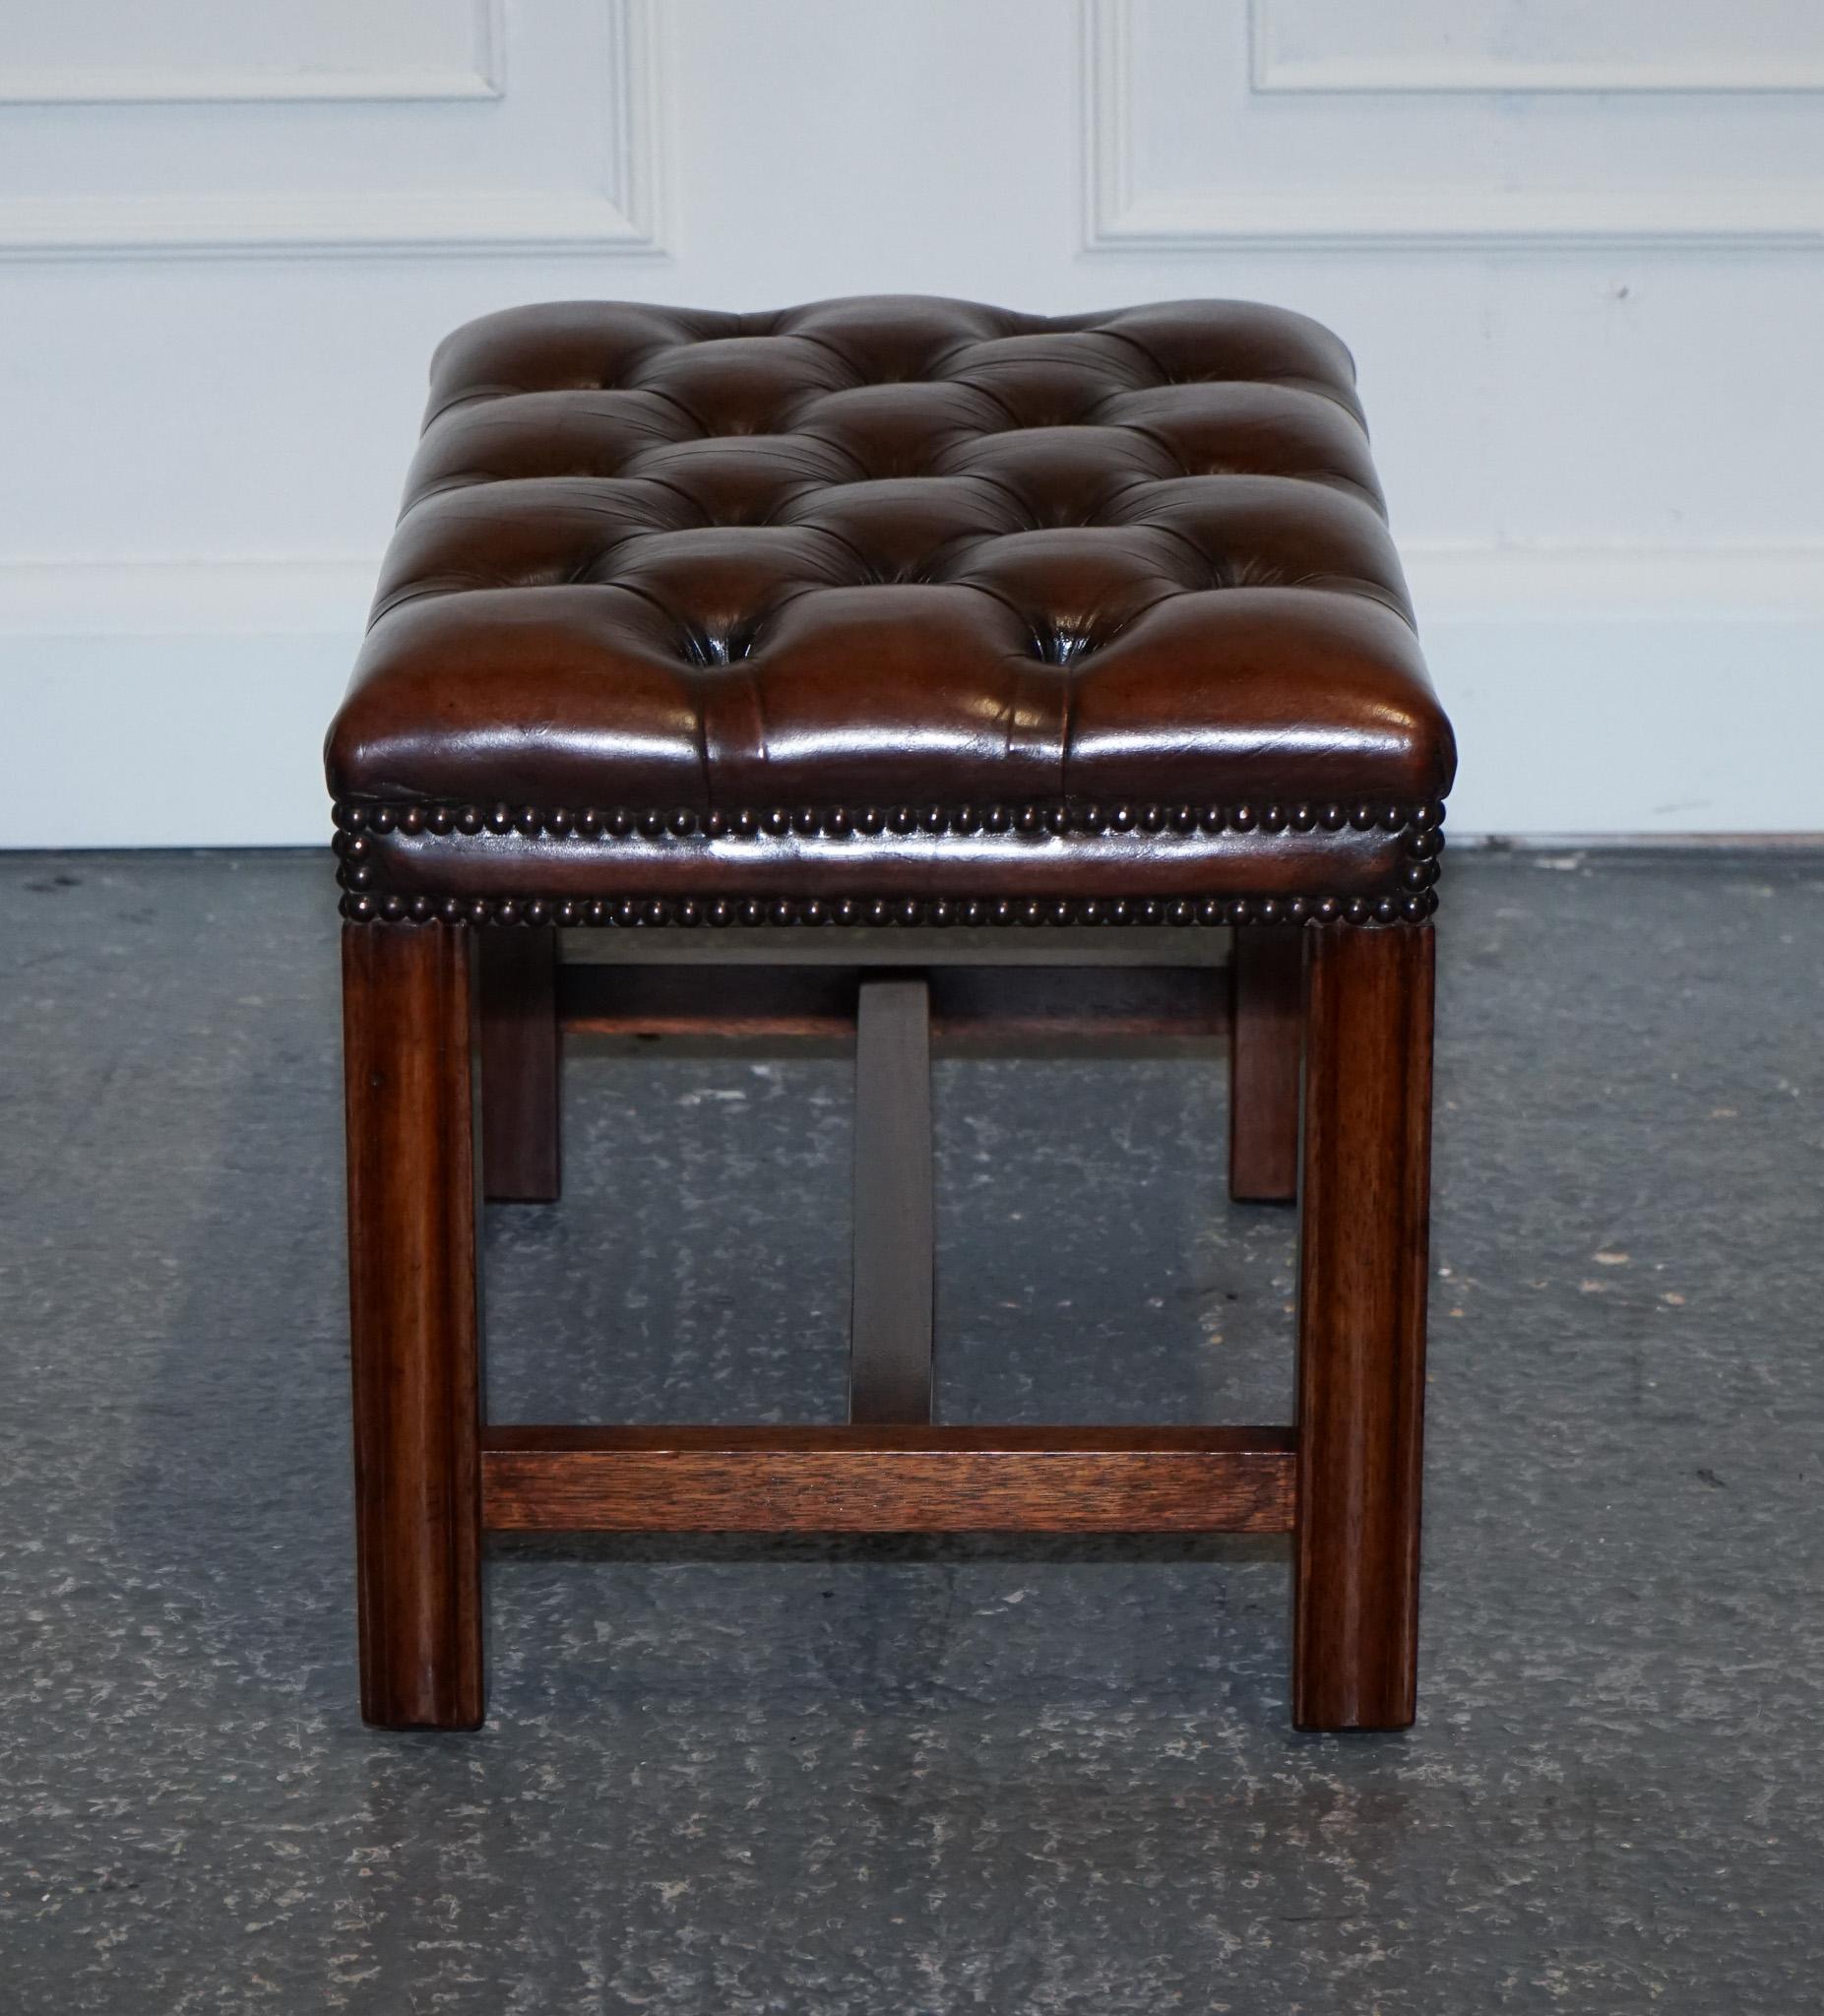 British VINTAGE RESTORED CHESTERFiELD HAND DYED BROWN LEATHER TUFFED FOOTSTOOL (2/2) For Sale